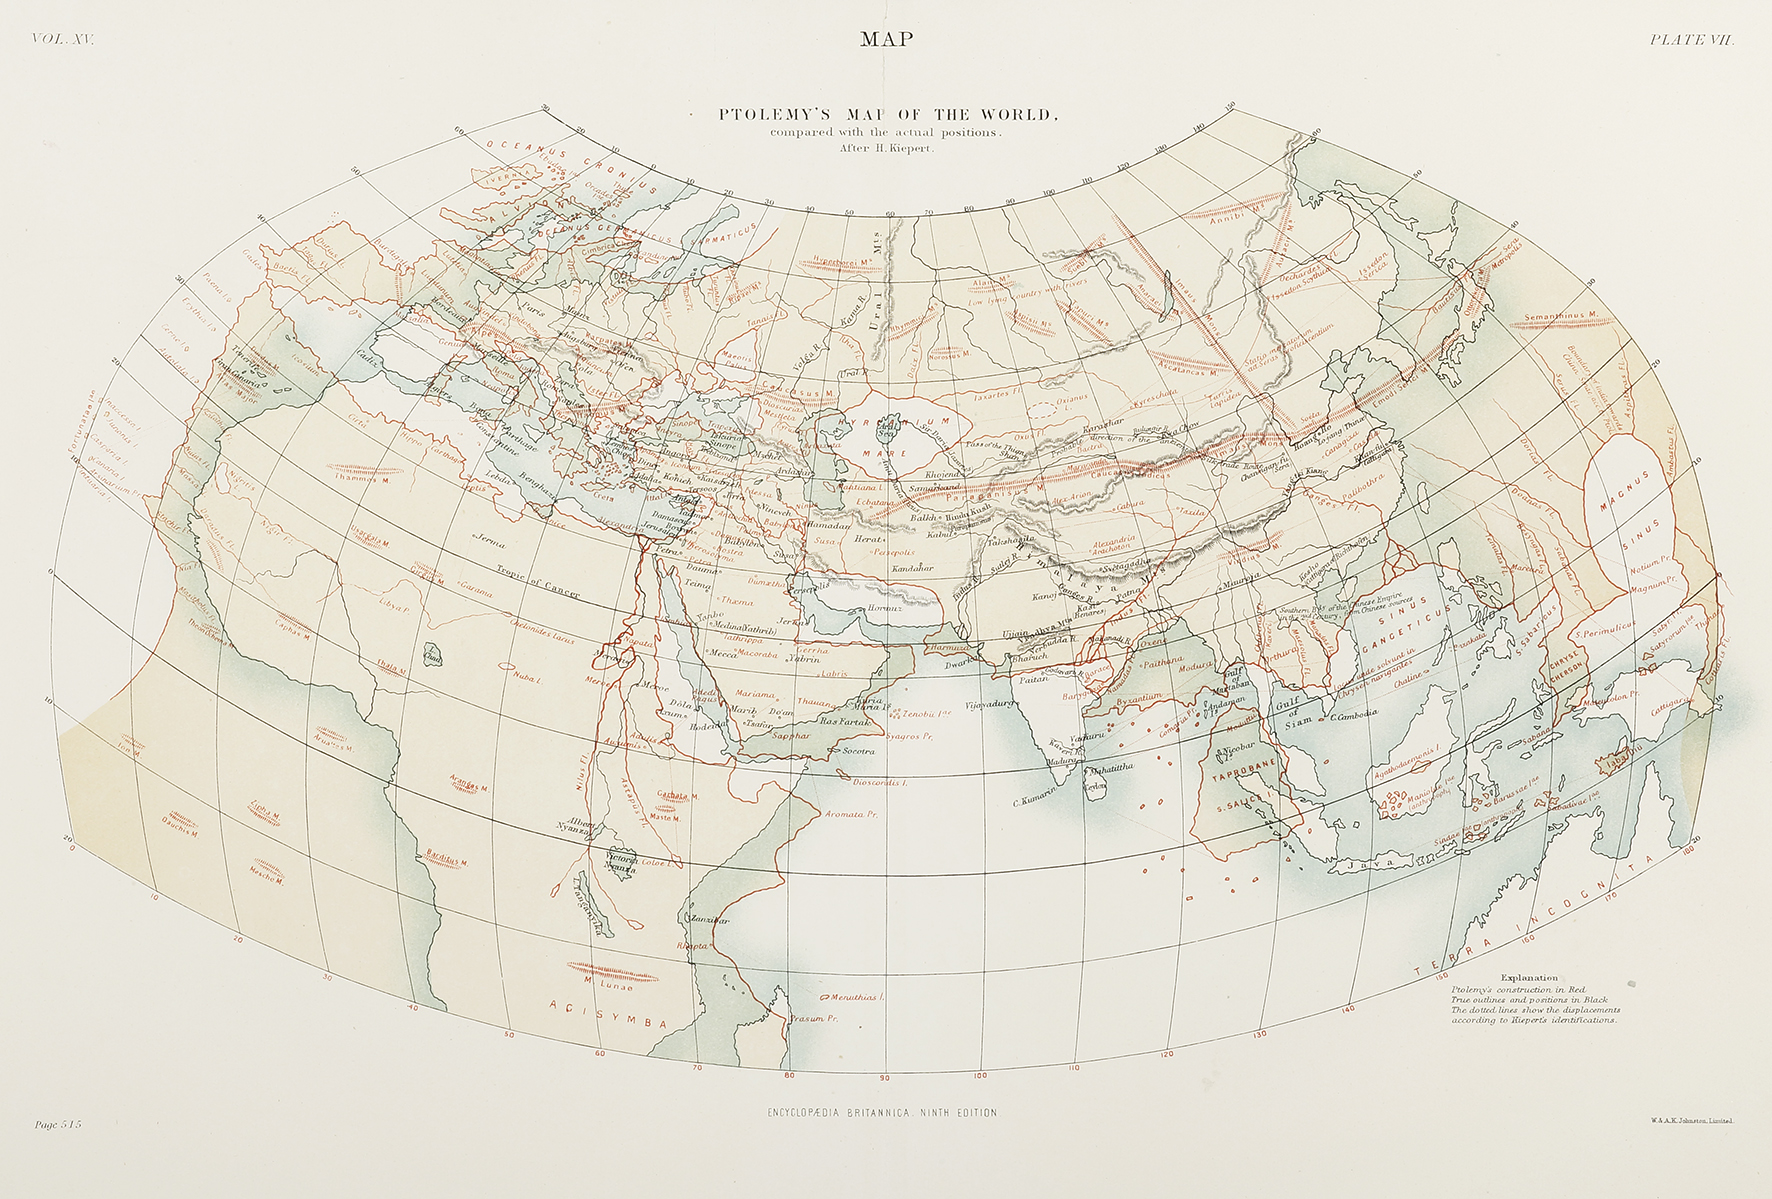 Ptolemy's Map of the World, Compared with the Actual Positions. After H.Kiepert. - Antique Map from 1885